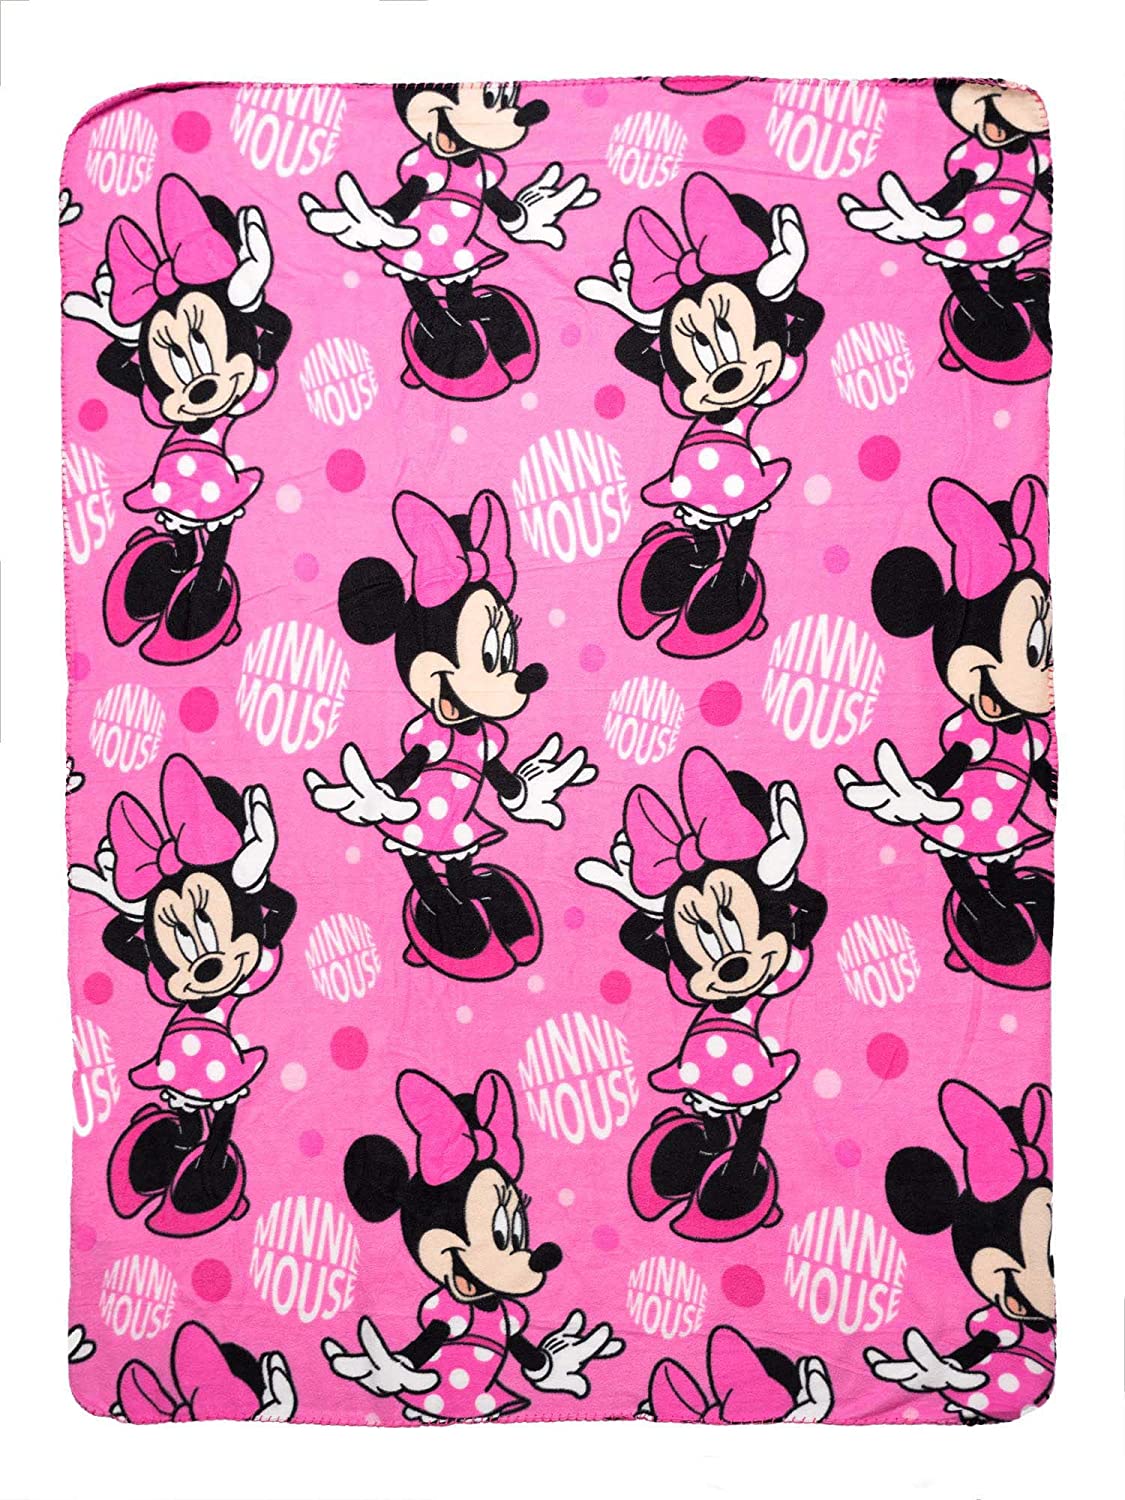 Minnie Mouse Fleece Throw Blanket 45 x 60 inches